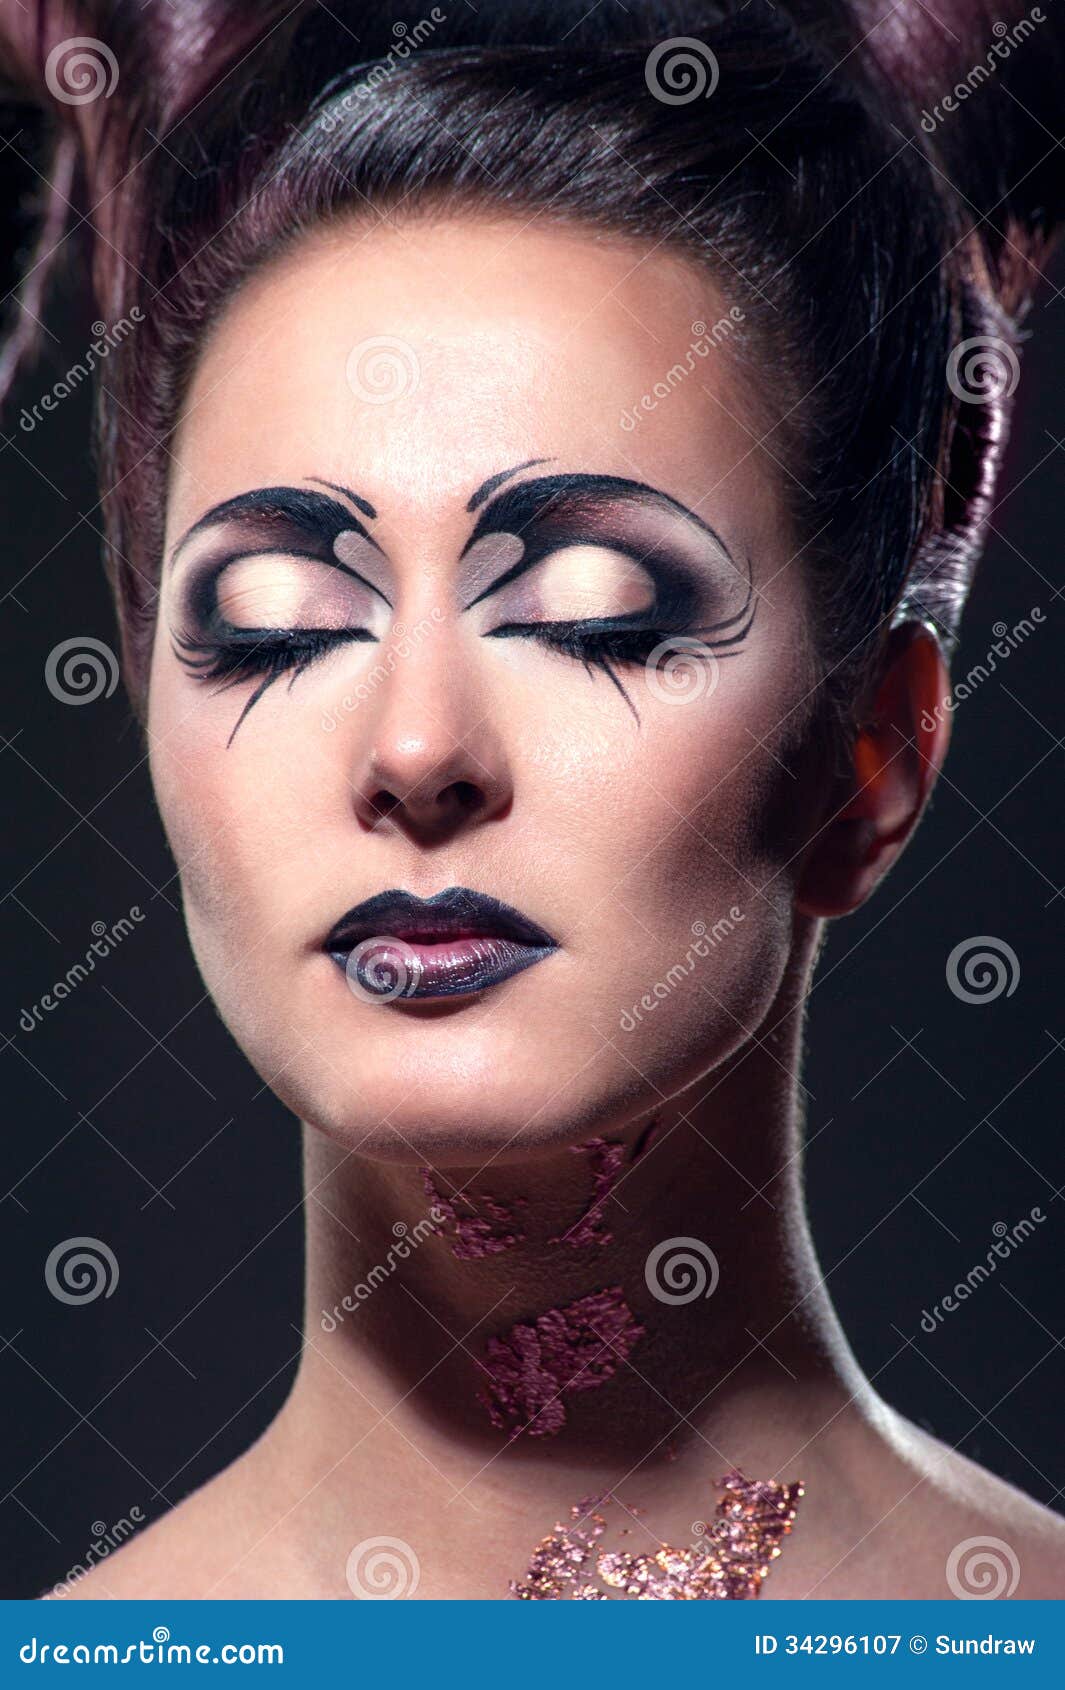 The girl with fancy makeup stock image. Image of female - 34296107